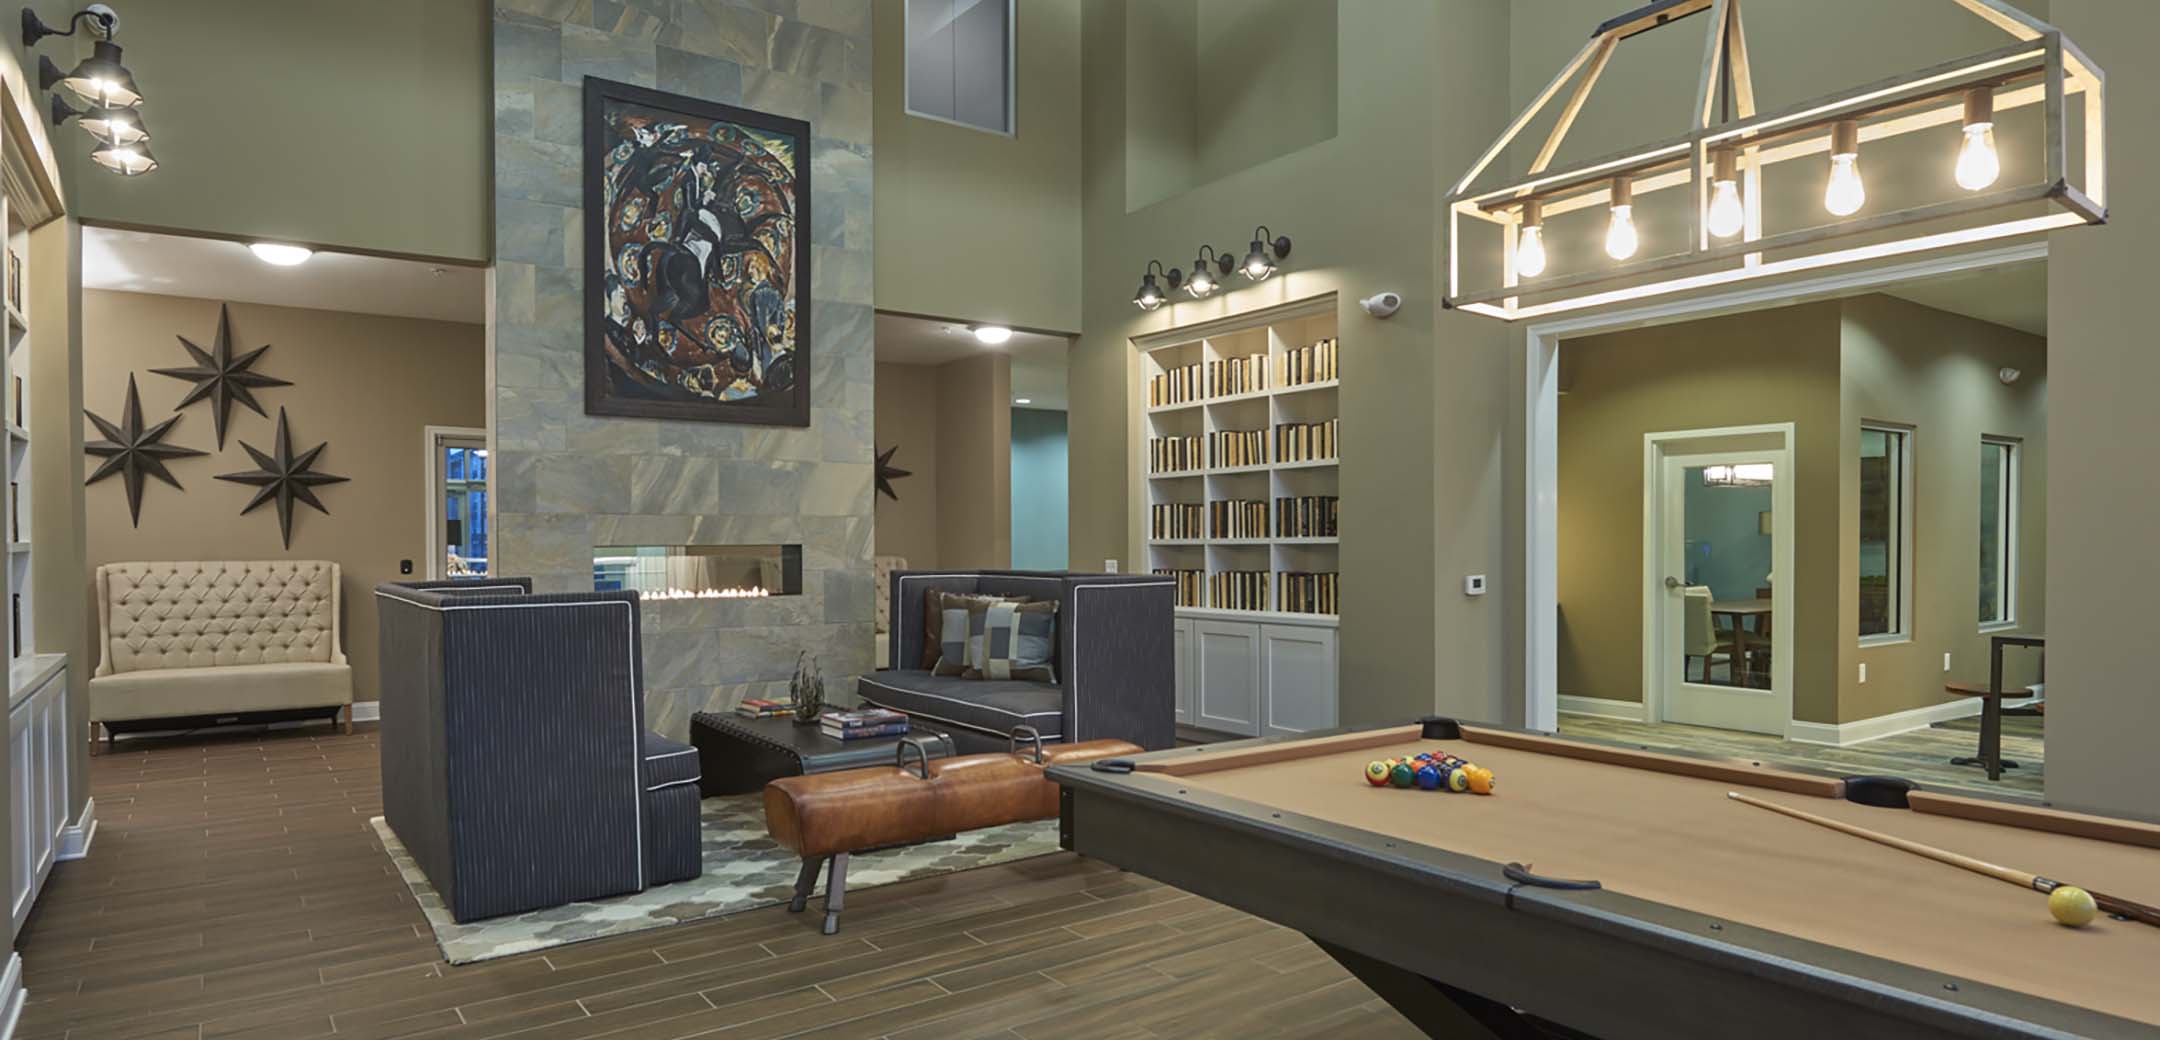 An interior view of the Haven building rest space with couches, bookshelves and a pool table with hanging lights over it.